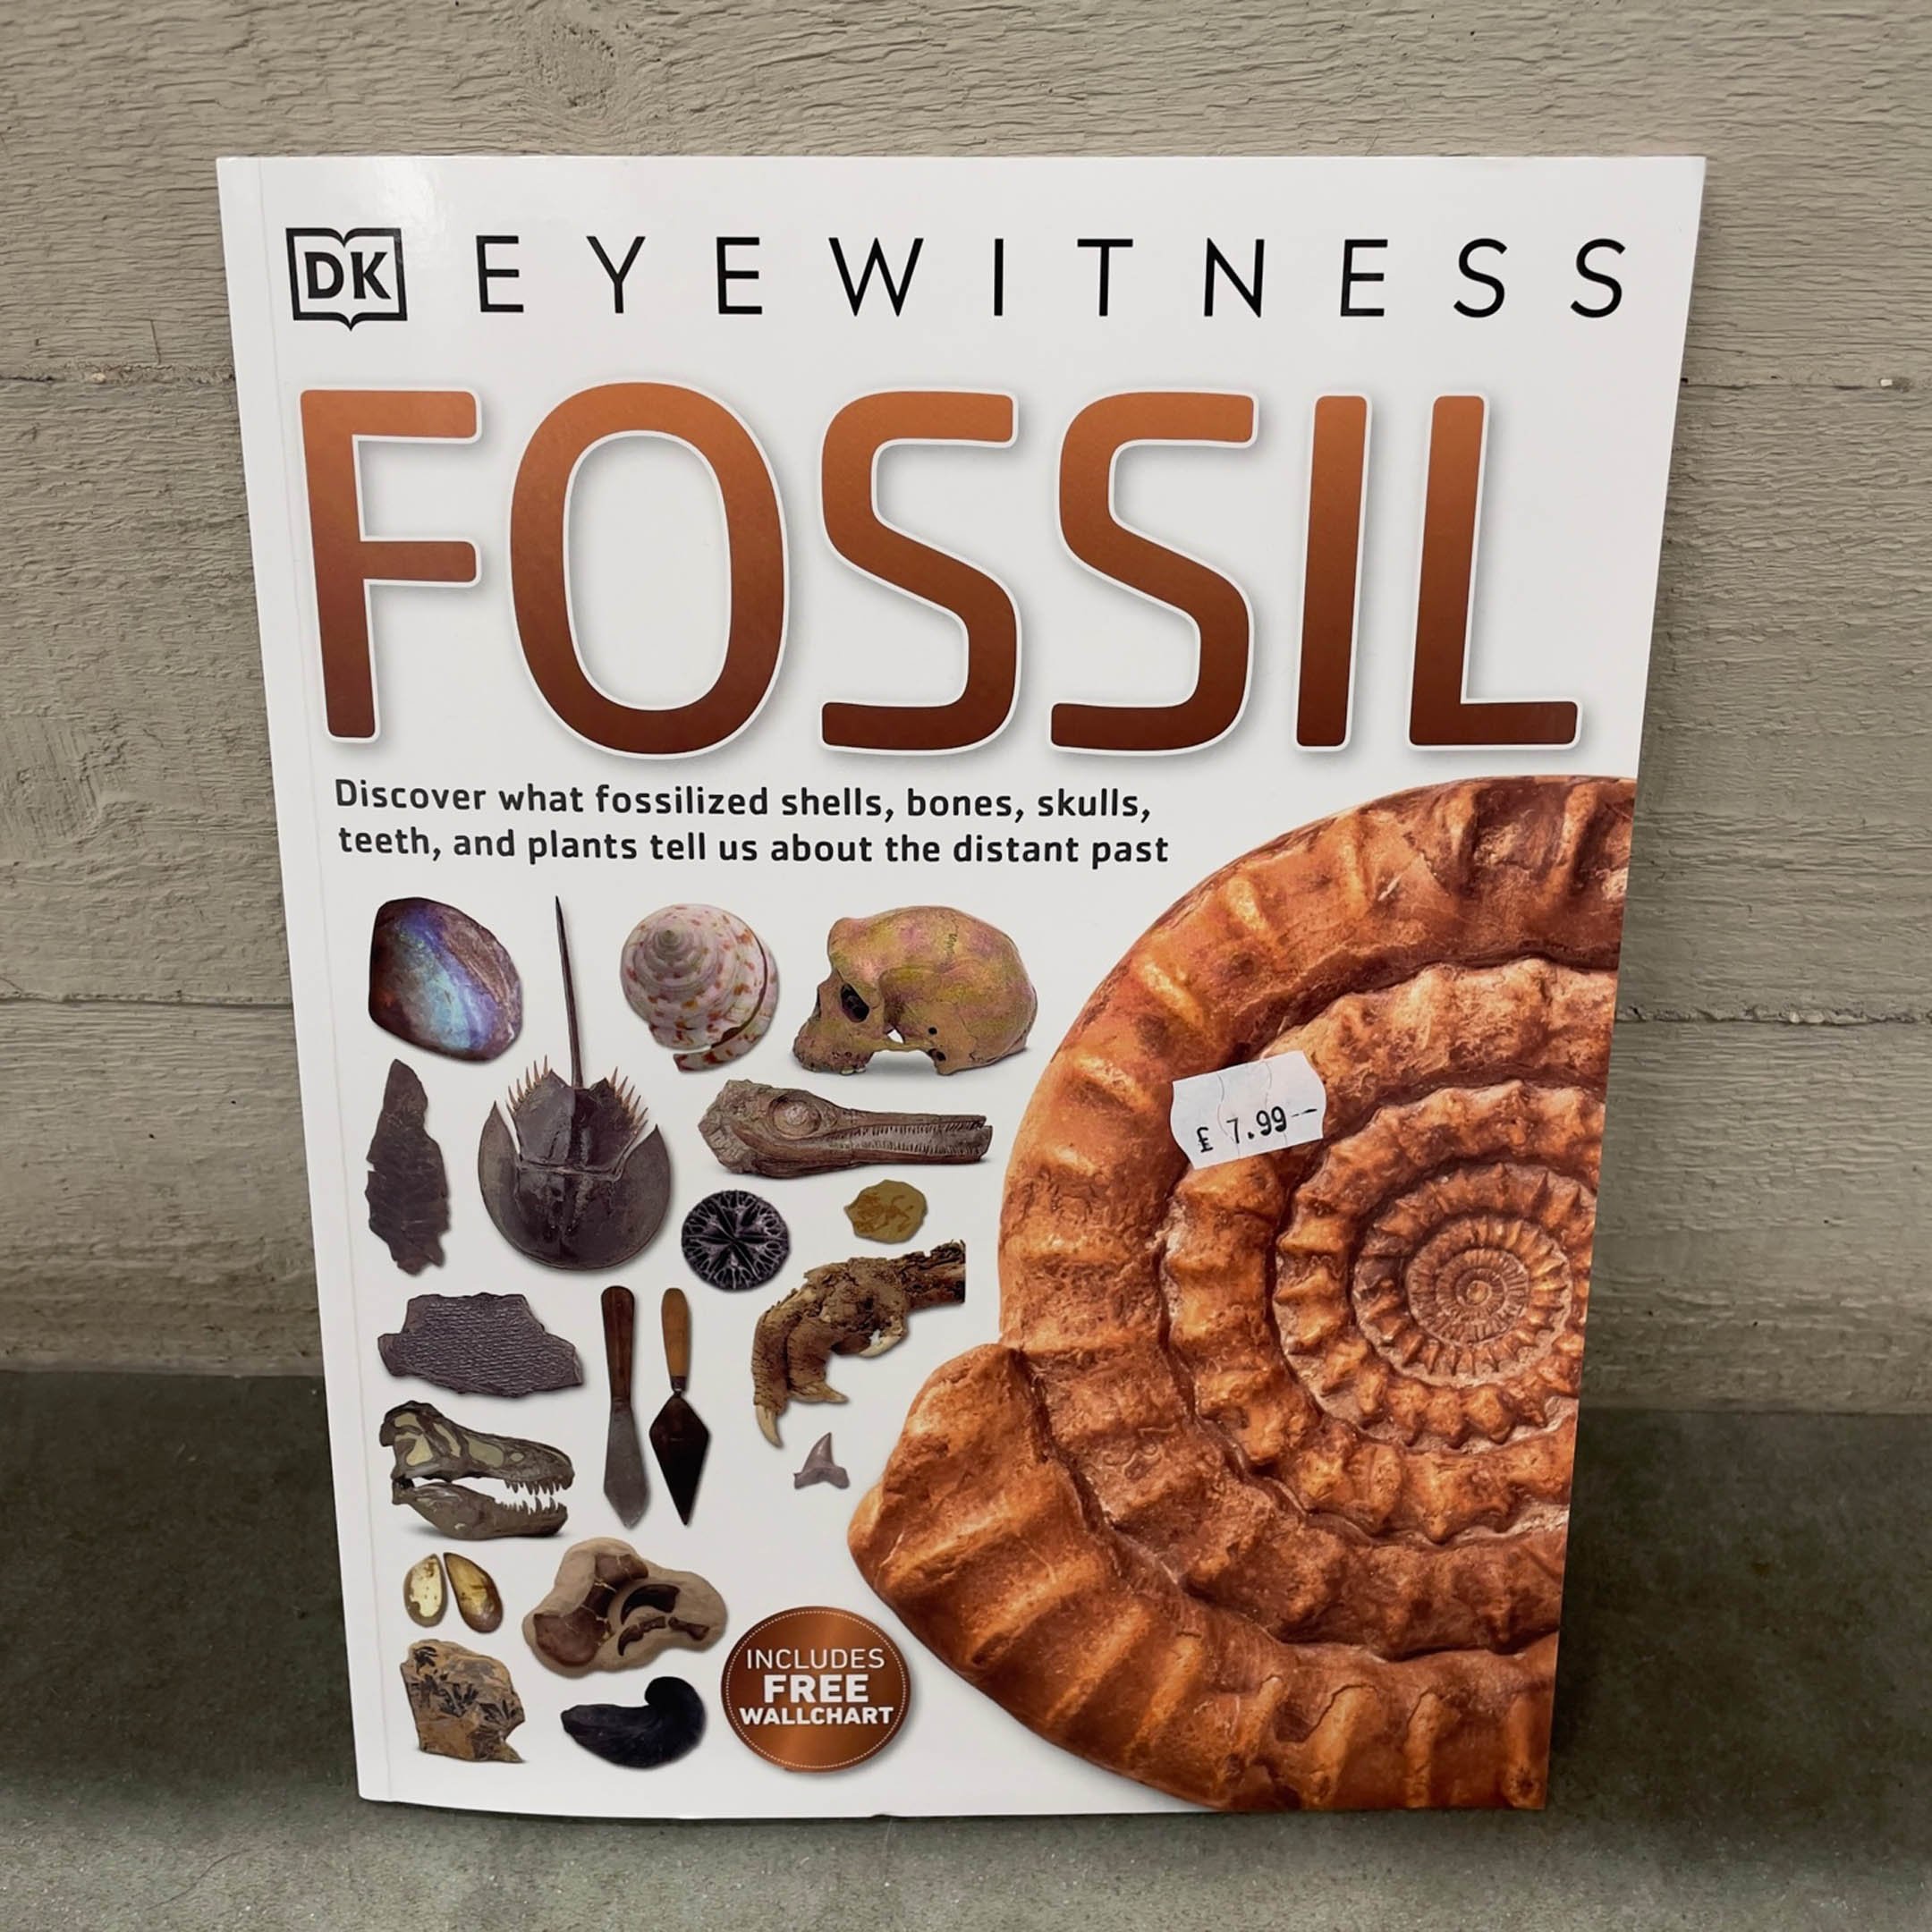 Eyewitness Fossil Book — The Etches Collection